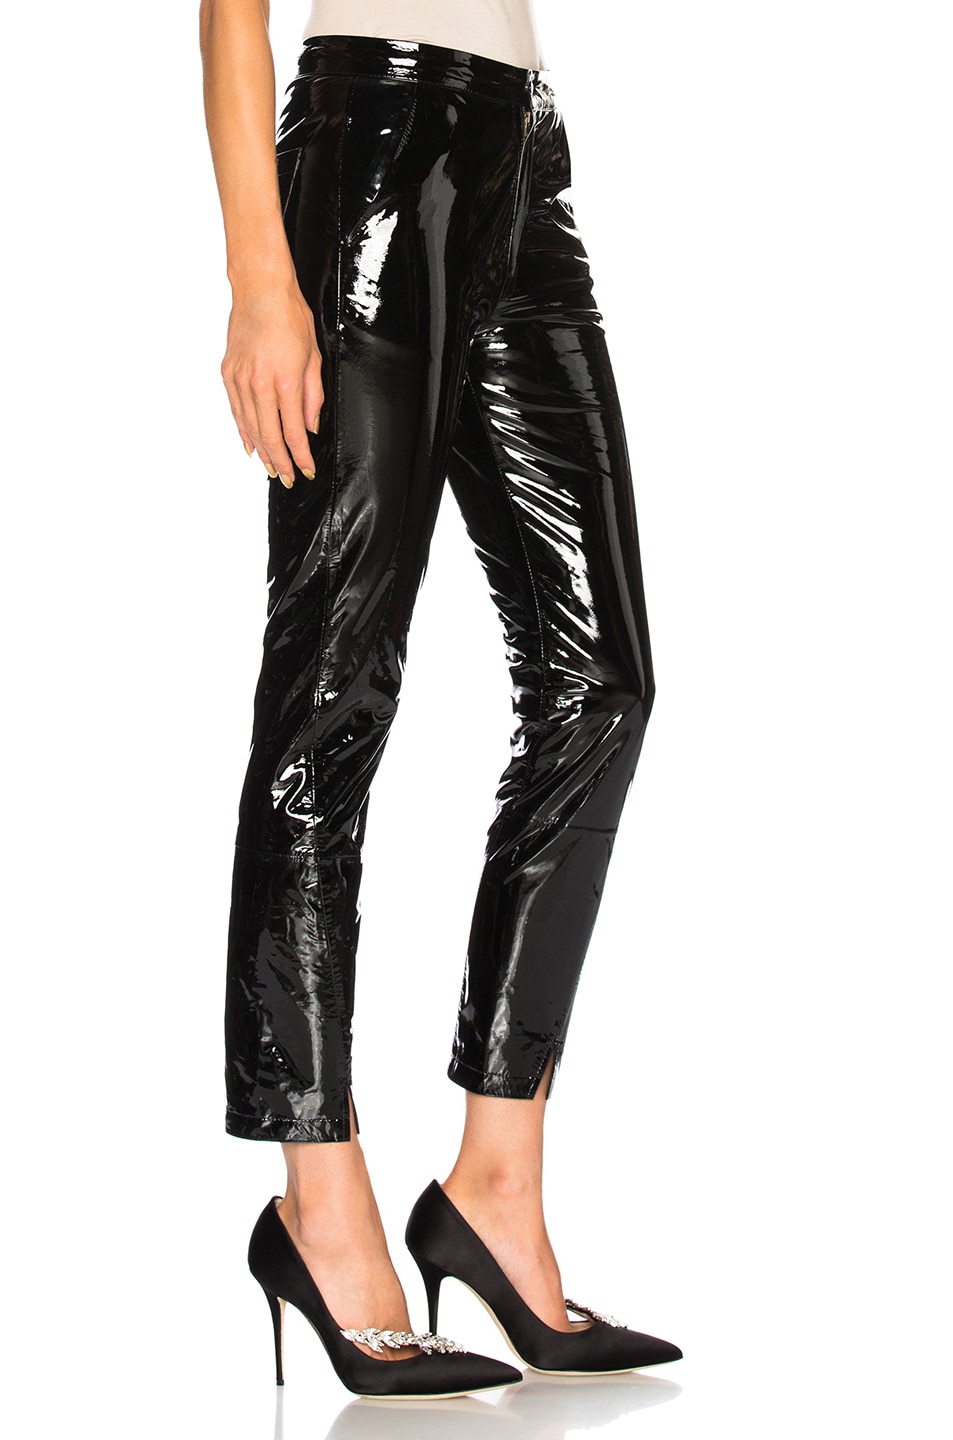 Zeynep Arcay Patent Leather Pants with Ankle Slits in Black | FWRD